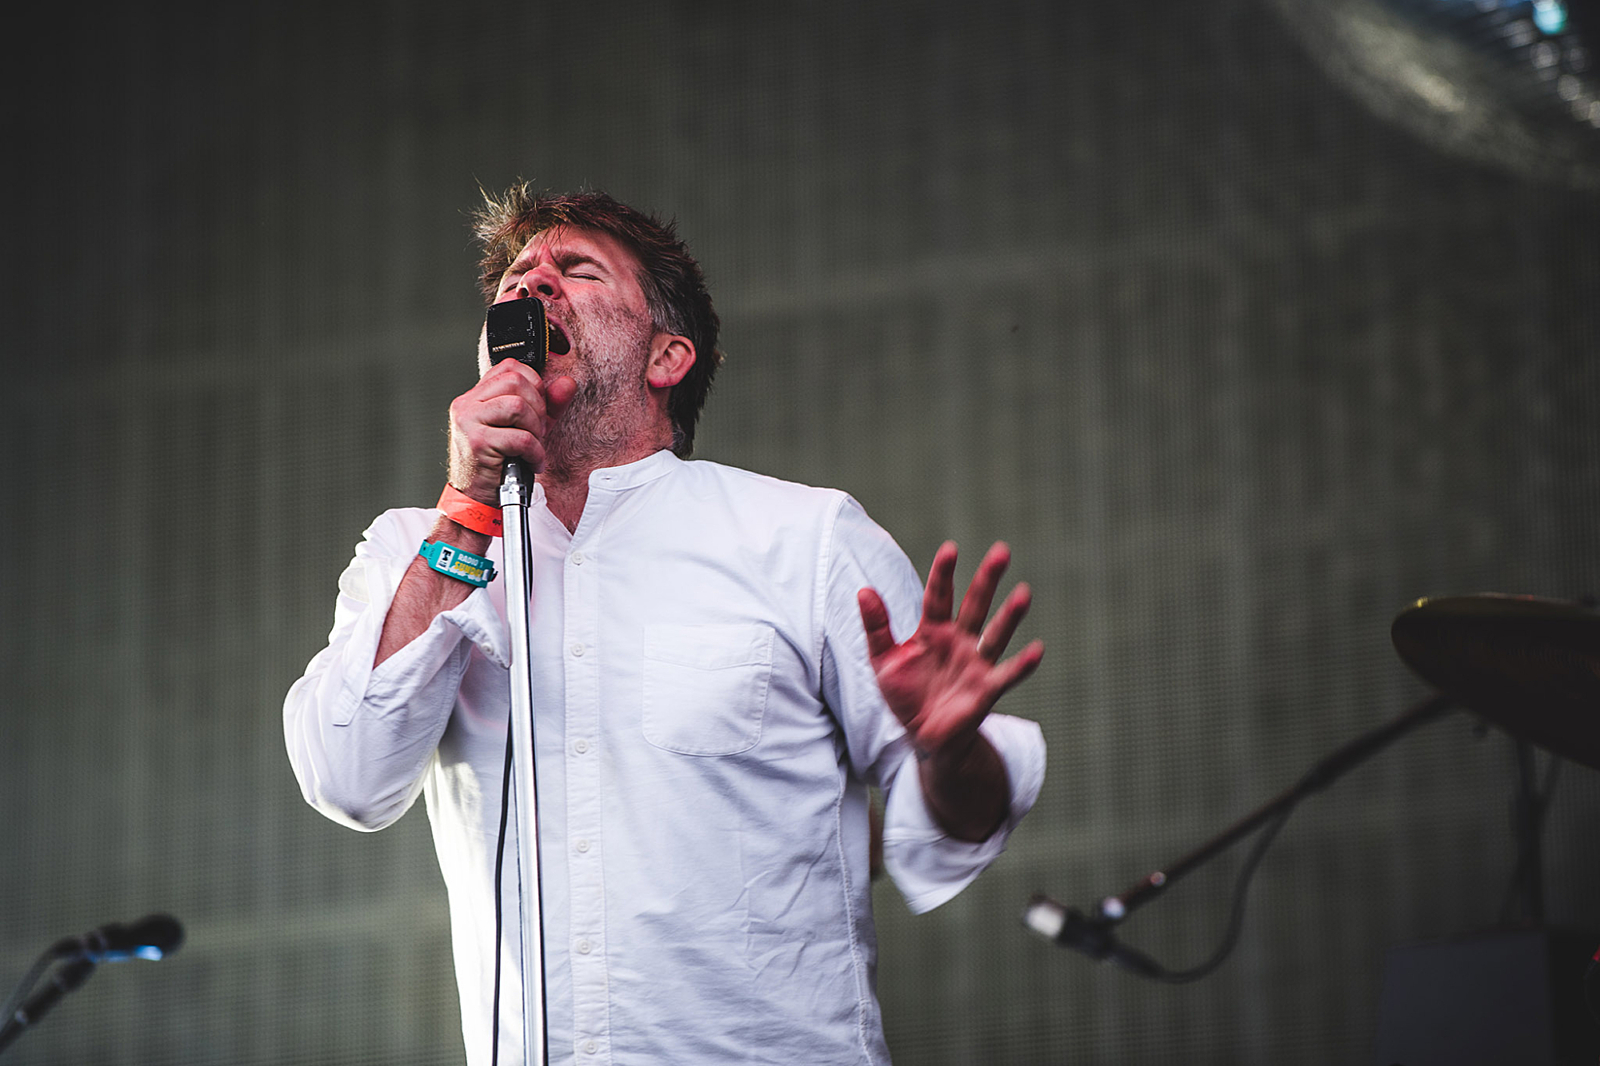 LCD Soundsystem cover Chic's 'I Want Your Love' for Spotify Singles session